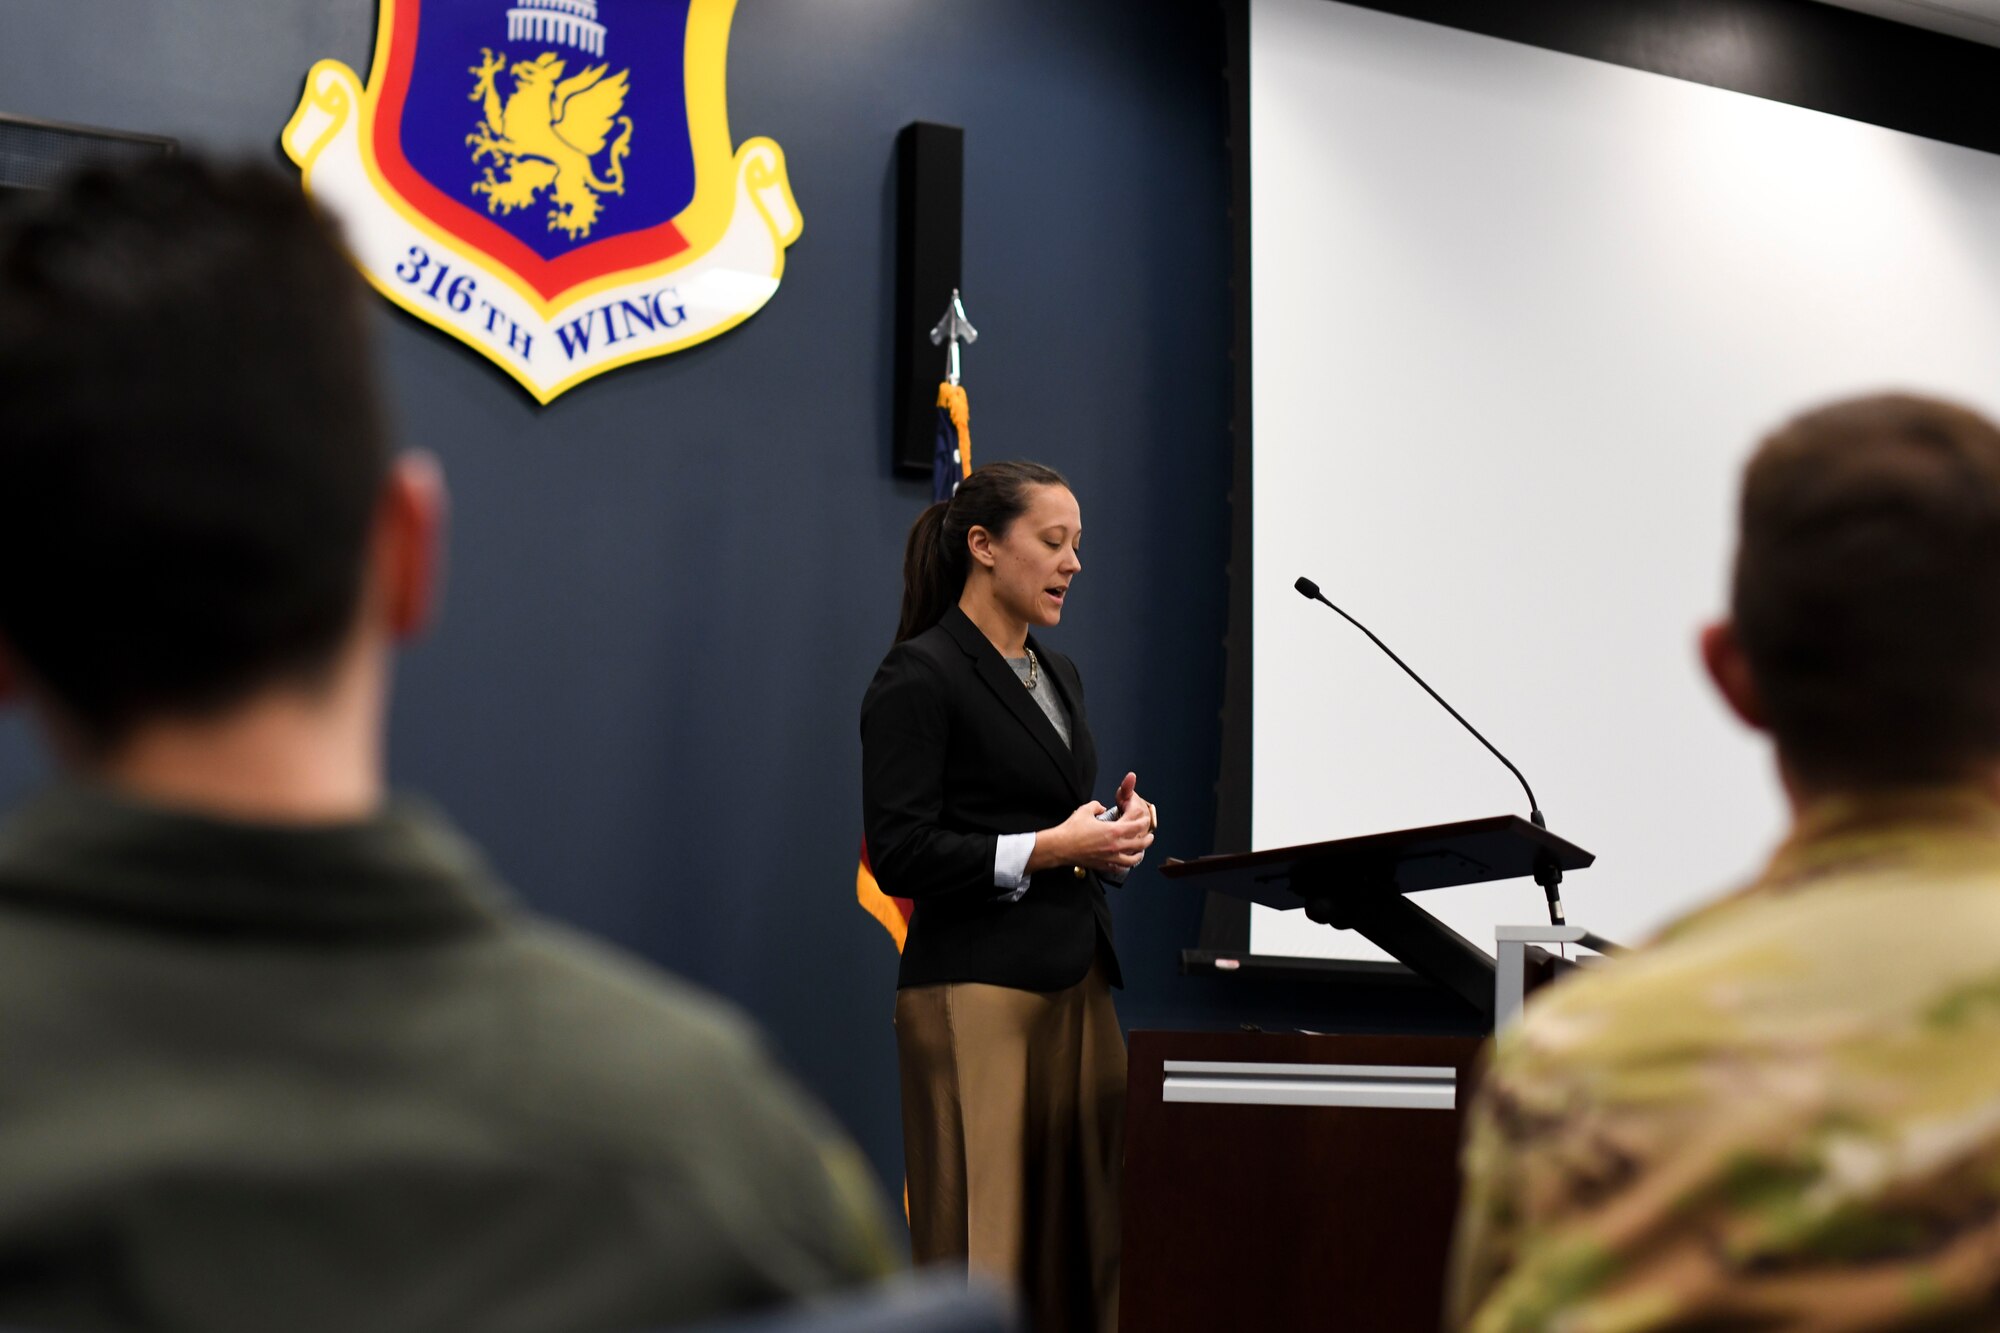 Dr. Sarah Barksdale, 316th Wing historian, shares the history of the 1st Helicopter Squadron for the 80th anniversary event at Joint Base Andrews, Md., April 11, 2024.